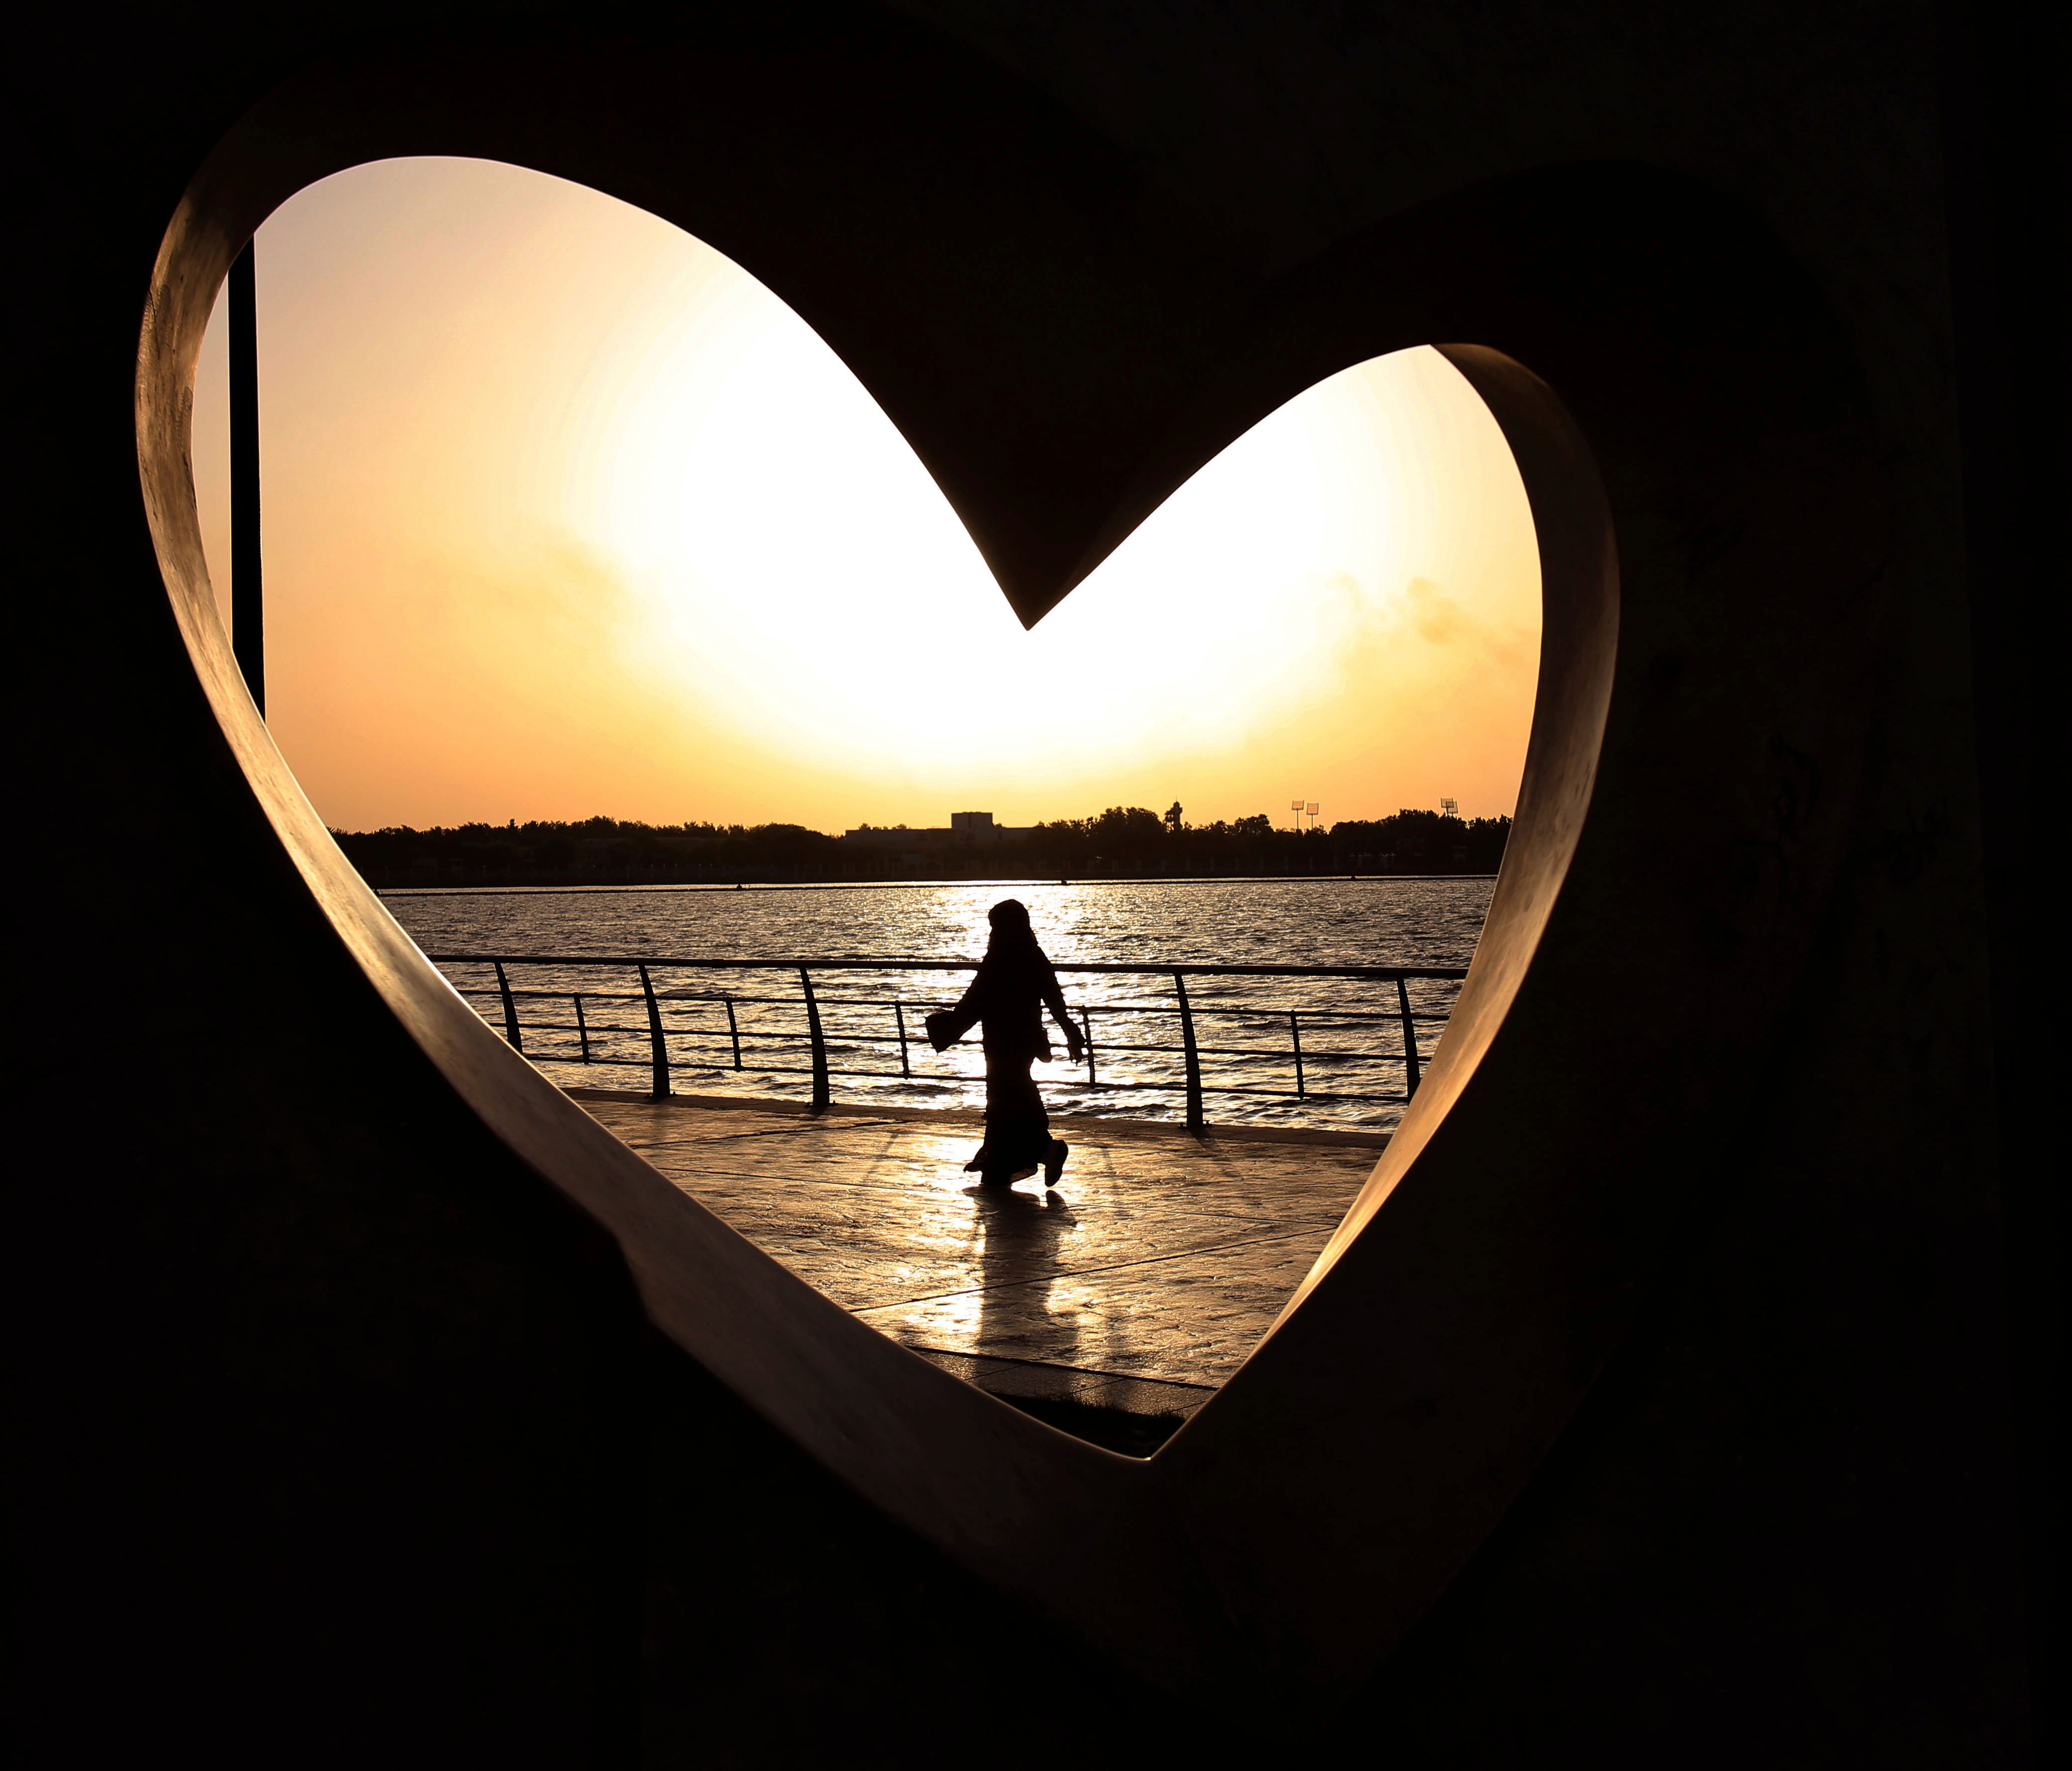 In this May 11, 2014 file photo, a Saudi woman seen through a heart-shaped statue walks along an inlet of the Red Sea in Jiddah, Saudi Arabia.